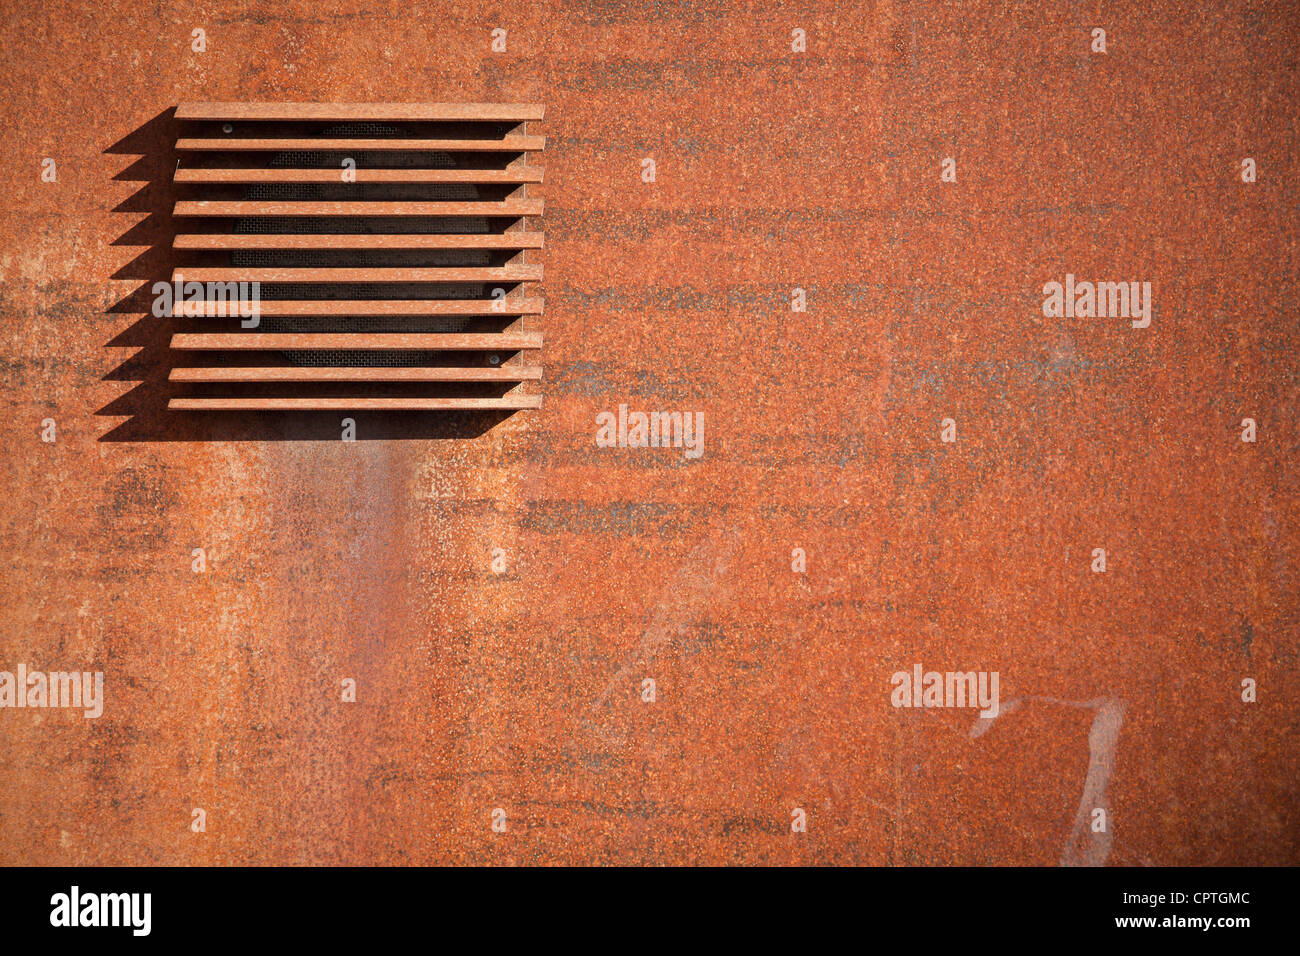 Fragment of a metal rusted wall with ventilation grille Stock Photo